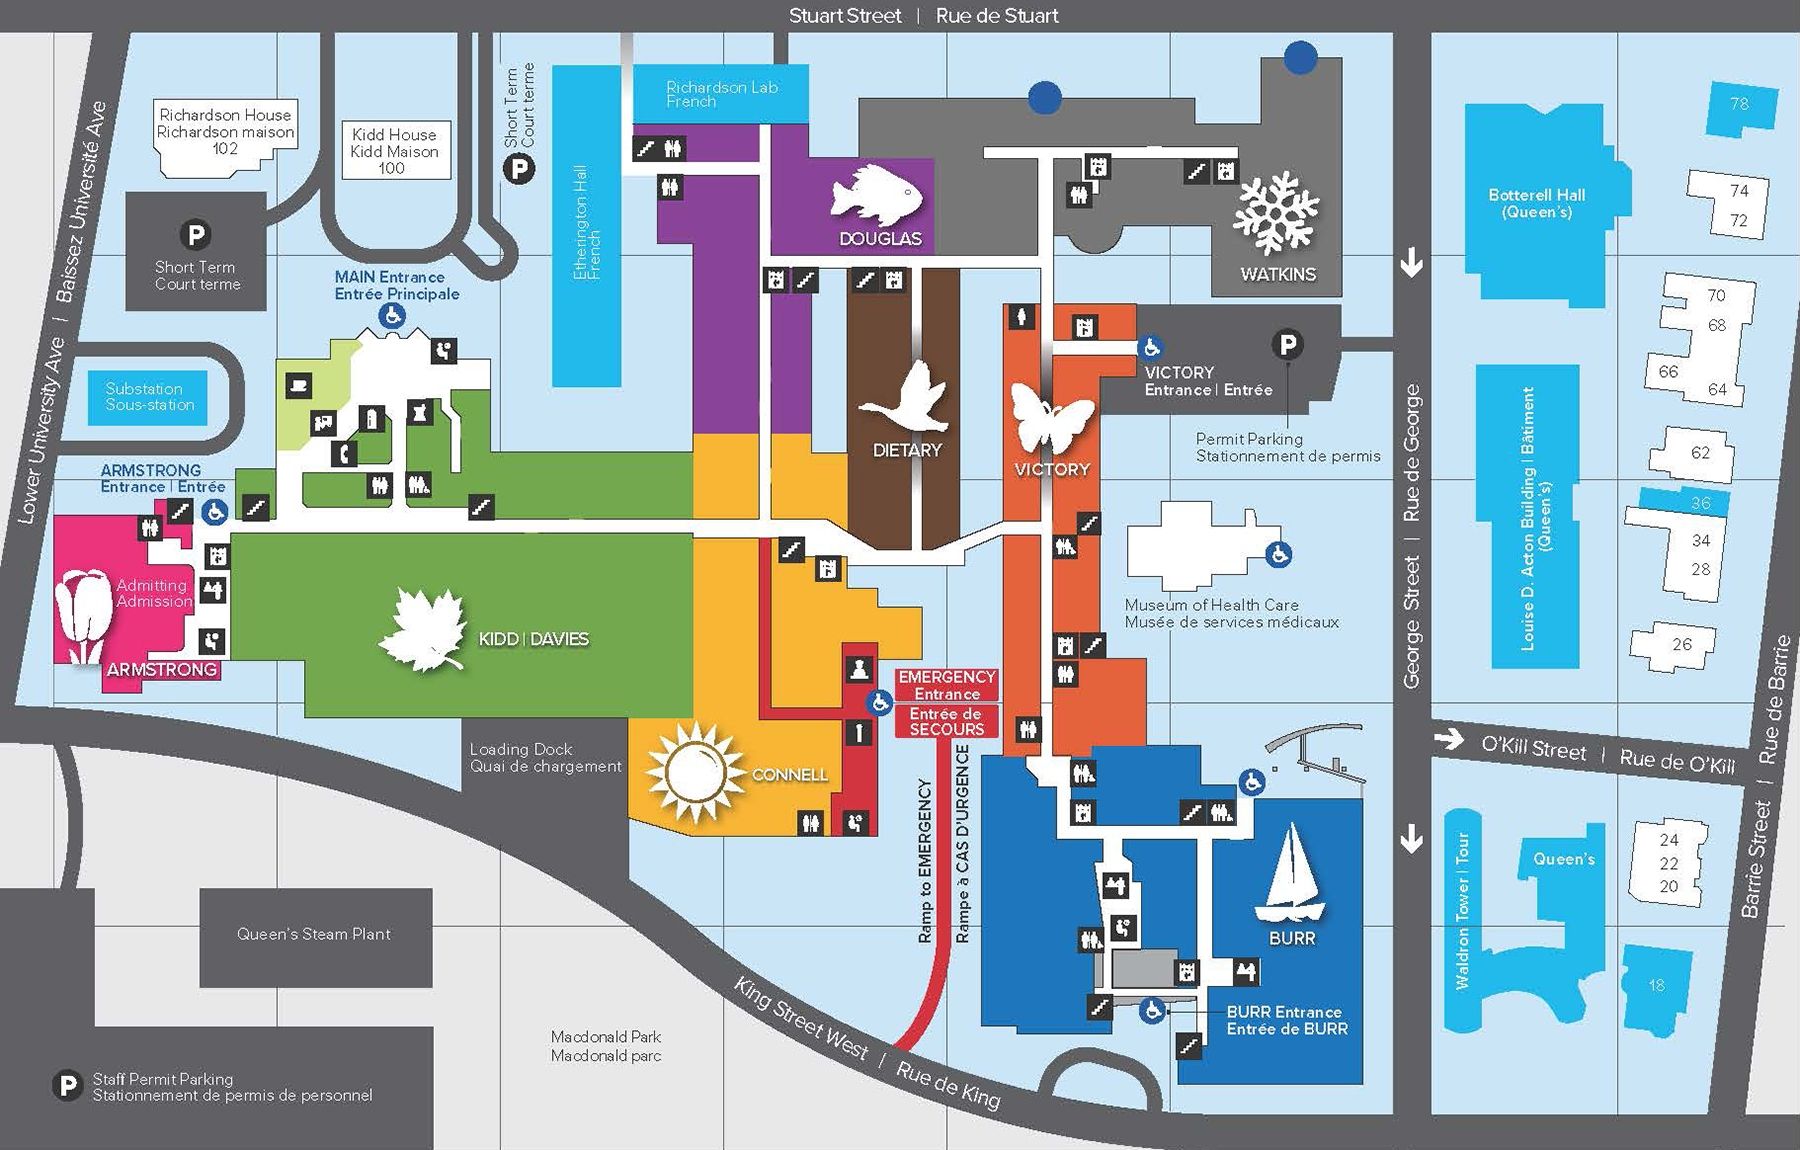 A sneak peek of the new map of KGH that was developed as part of the overall wayfinding project.